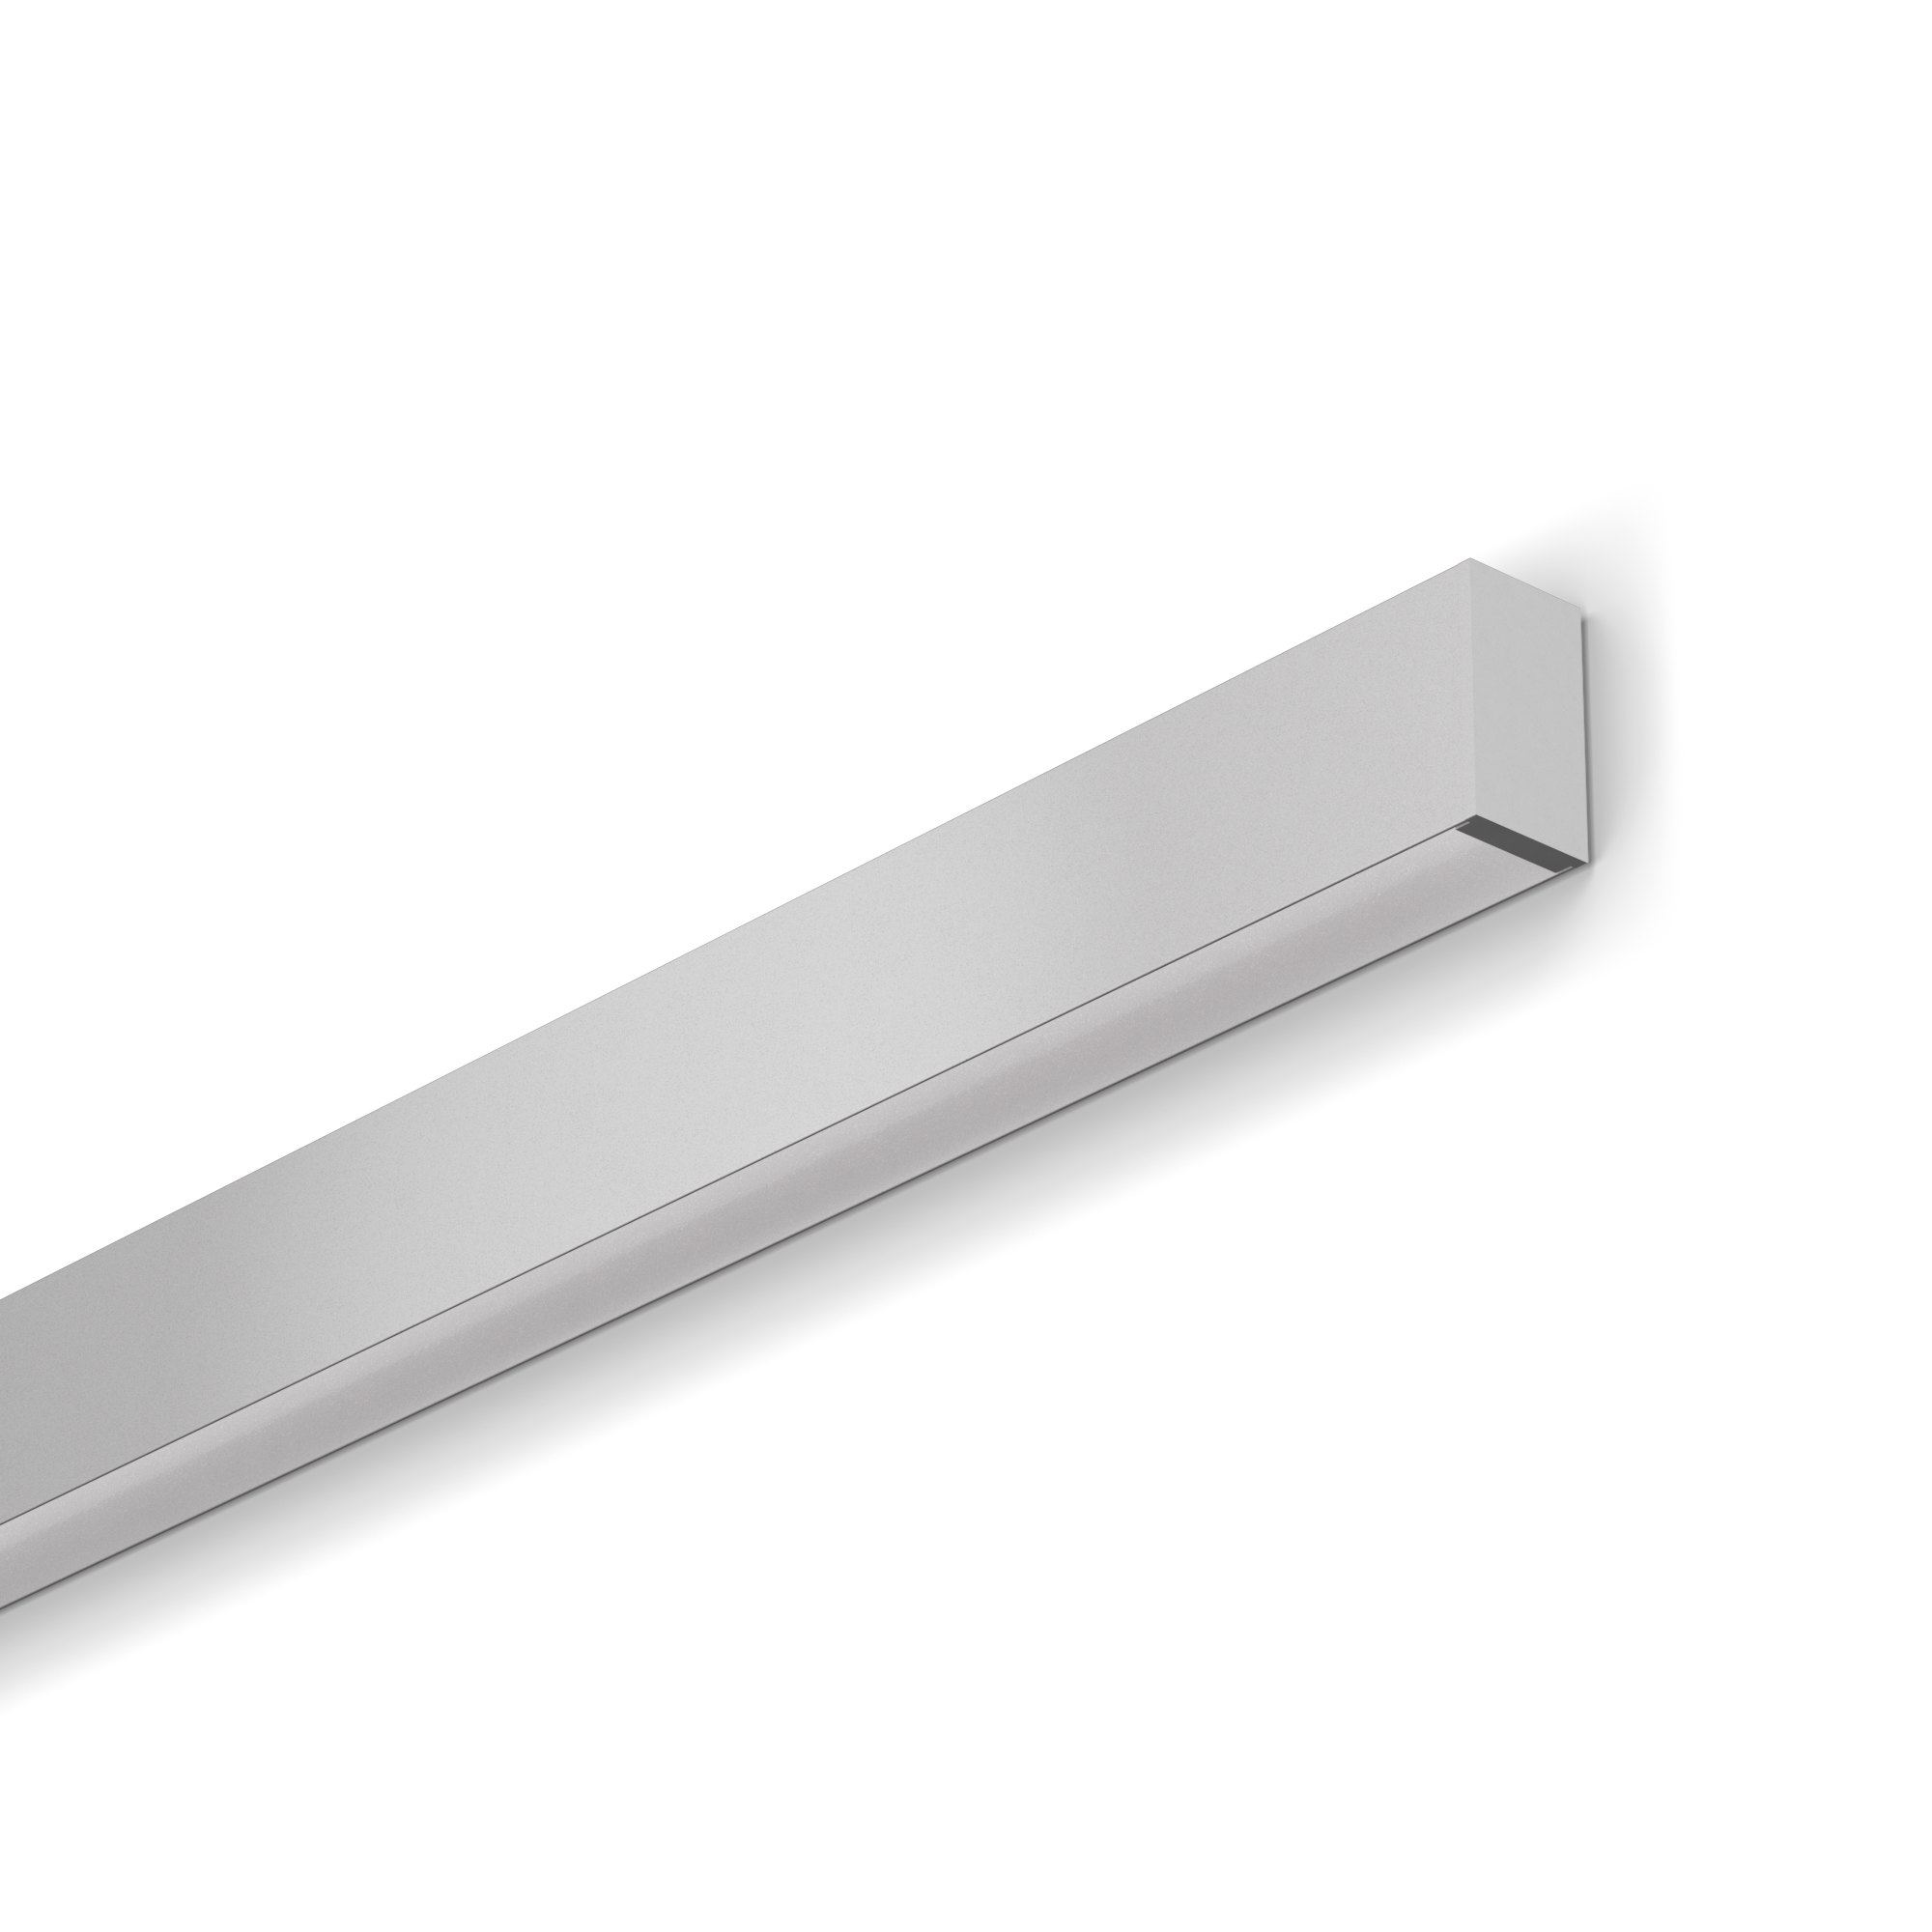 0.95” Ultra-Compact LED Linear
NANOBeam is 0.95” wide, bringing regressed SmartBeam® capabilities to a wall-mounted form factor that complements architectural space. NANOBeam features a remote driver to remove visual bulk.